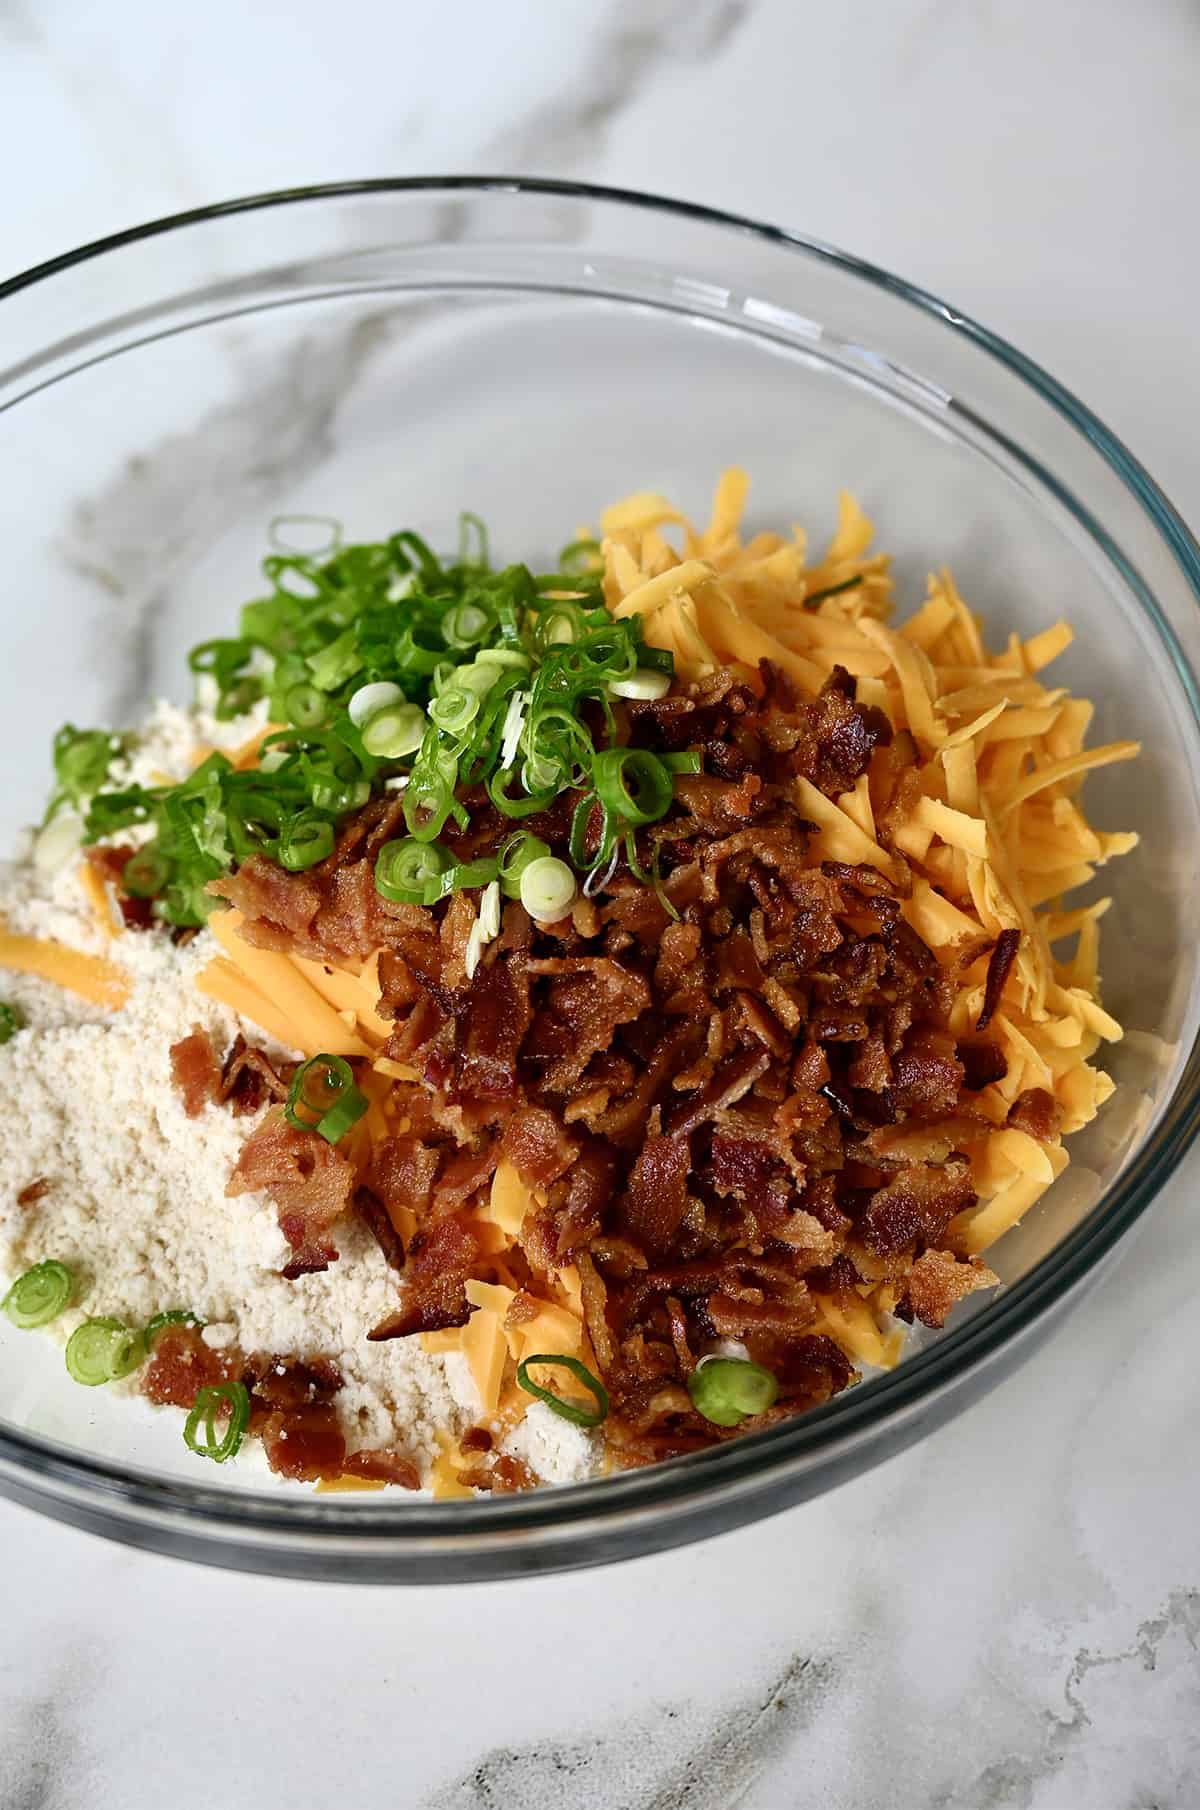 A glass bowl containing flour, crispy bacon pieces, shredded cheddar cheese and sliced scallions.